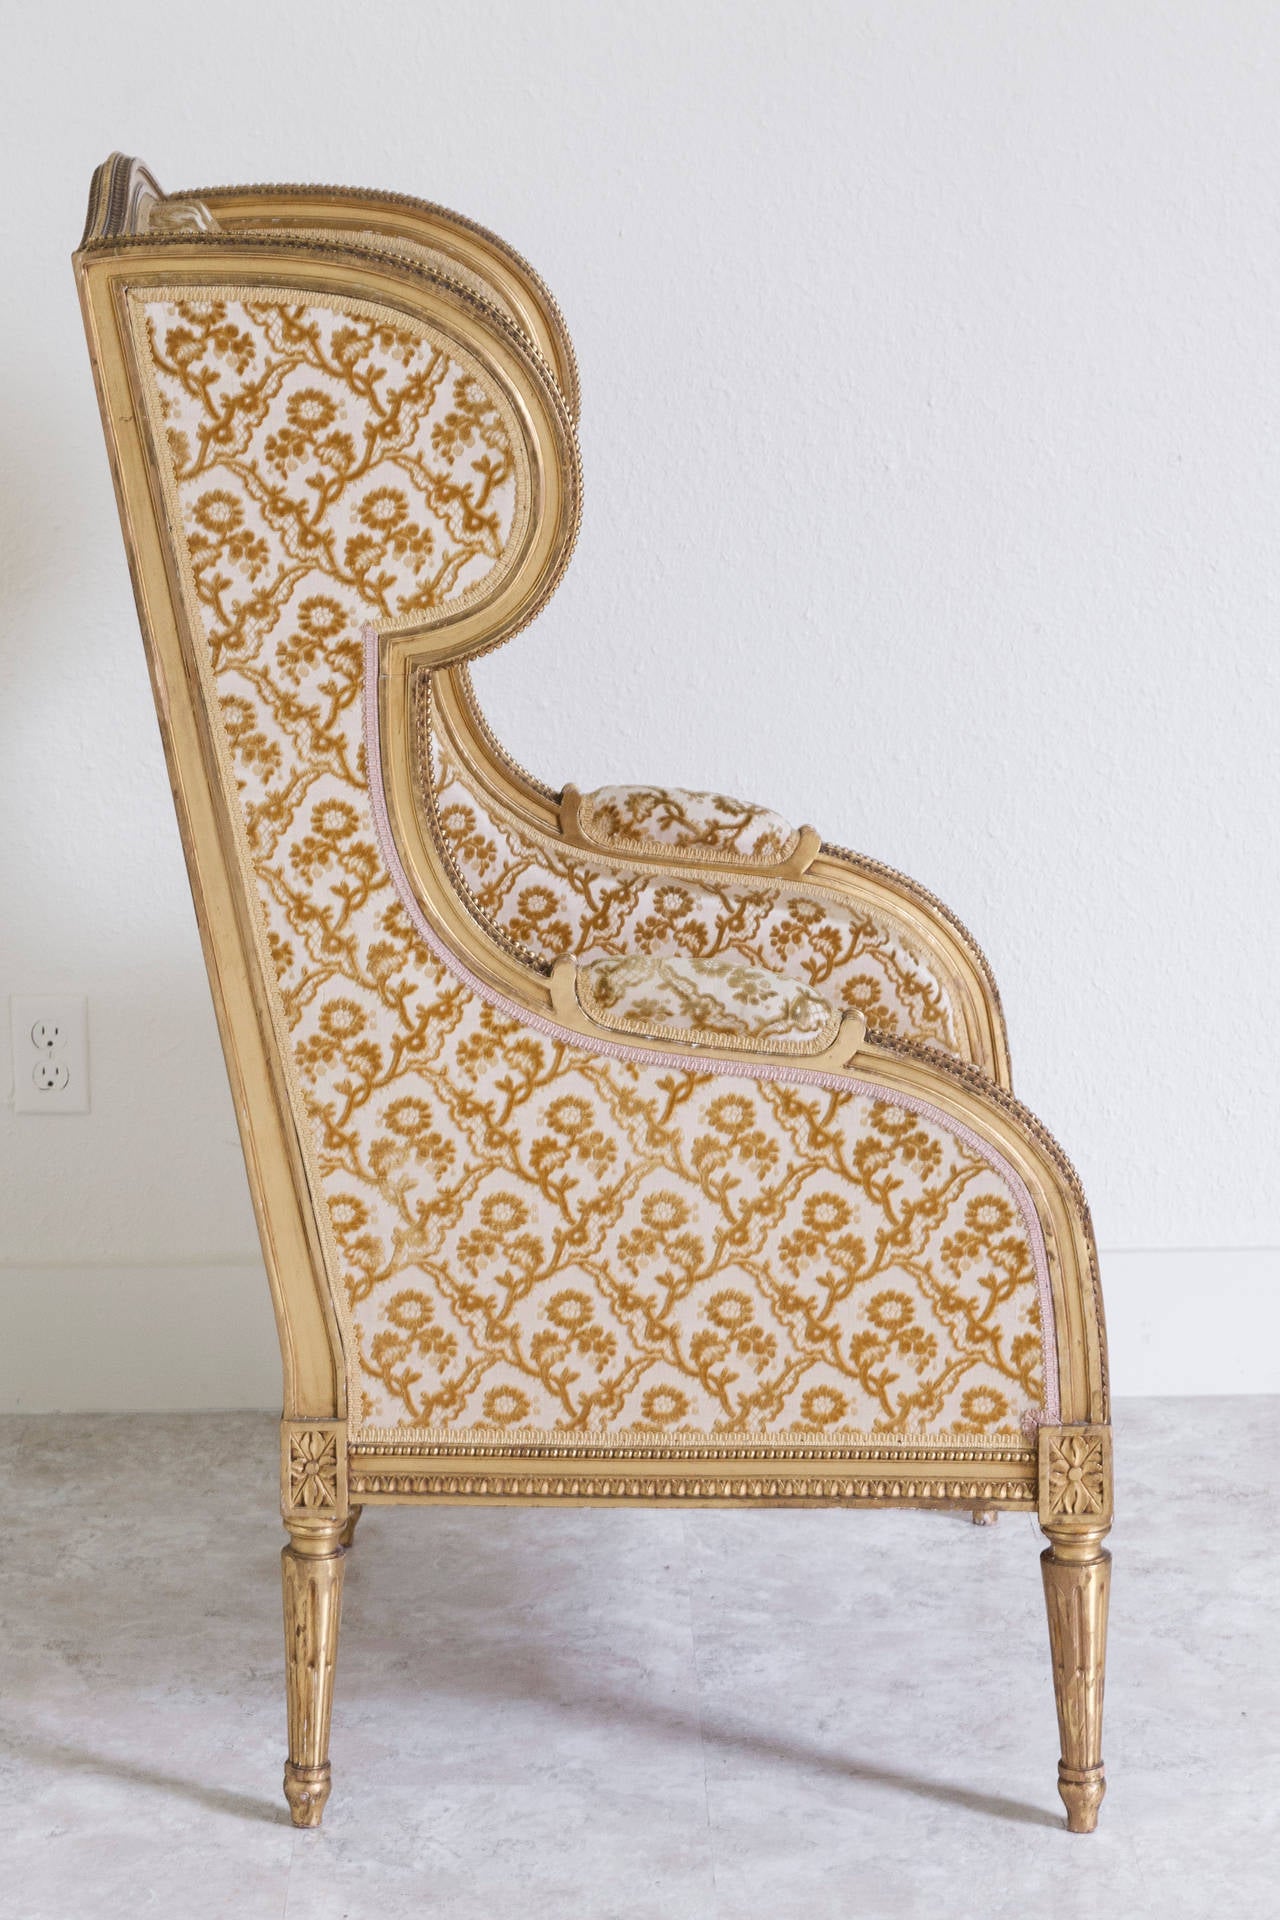 Early 20th Century Fine French Louis XVI Wingback Chair with 22-Karat Giltwood Frame